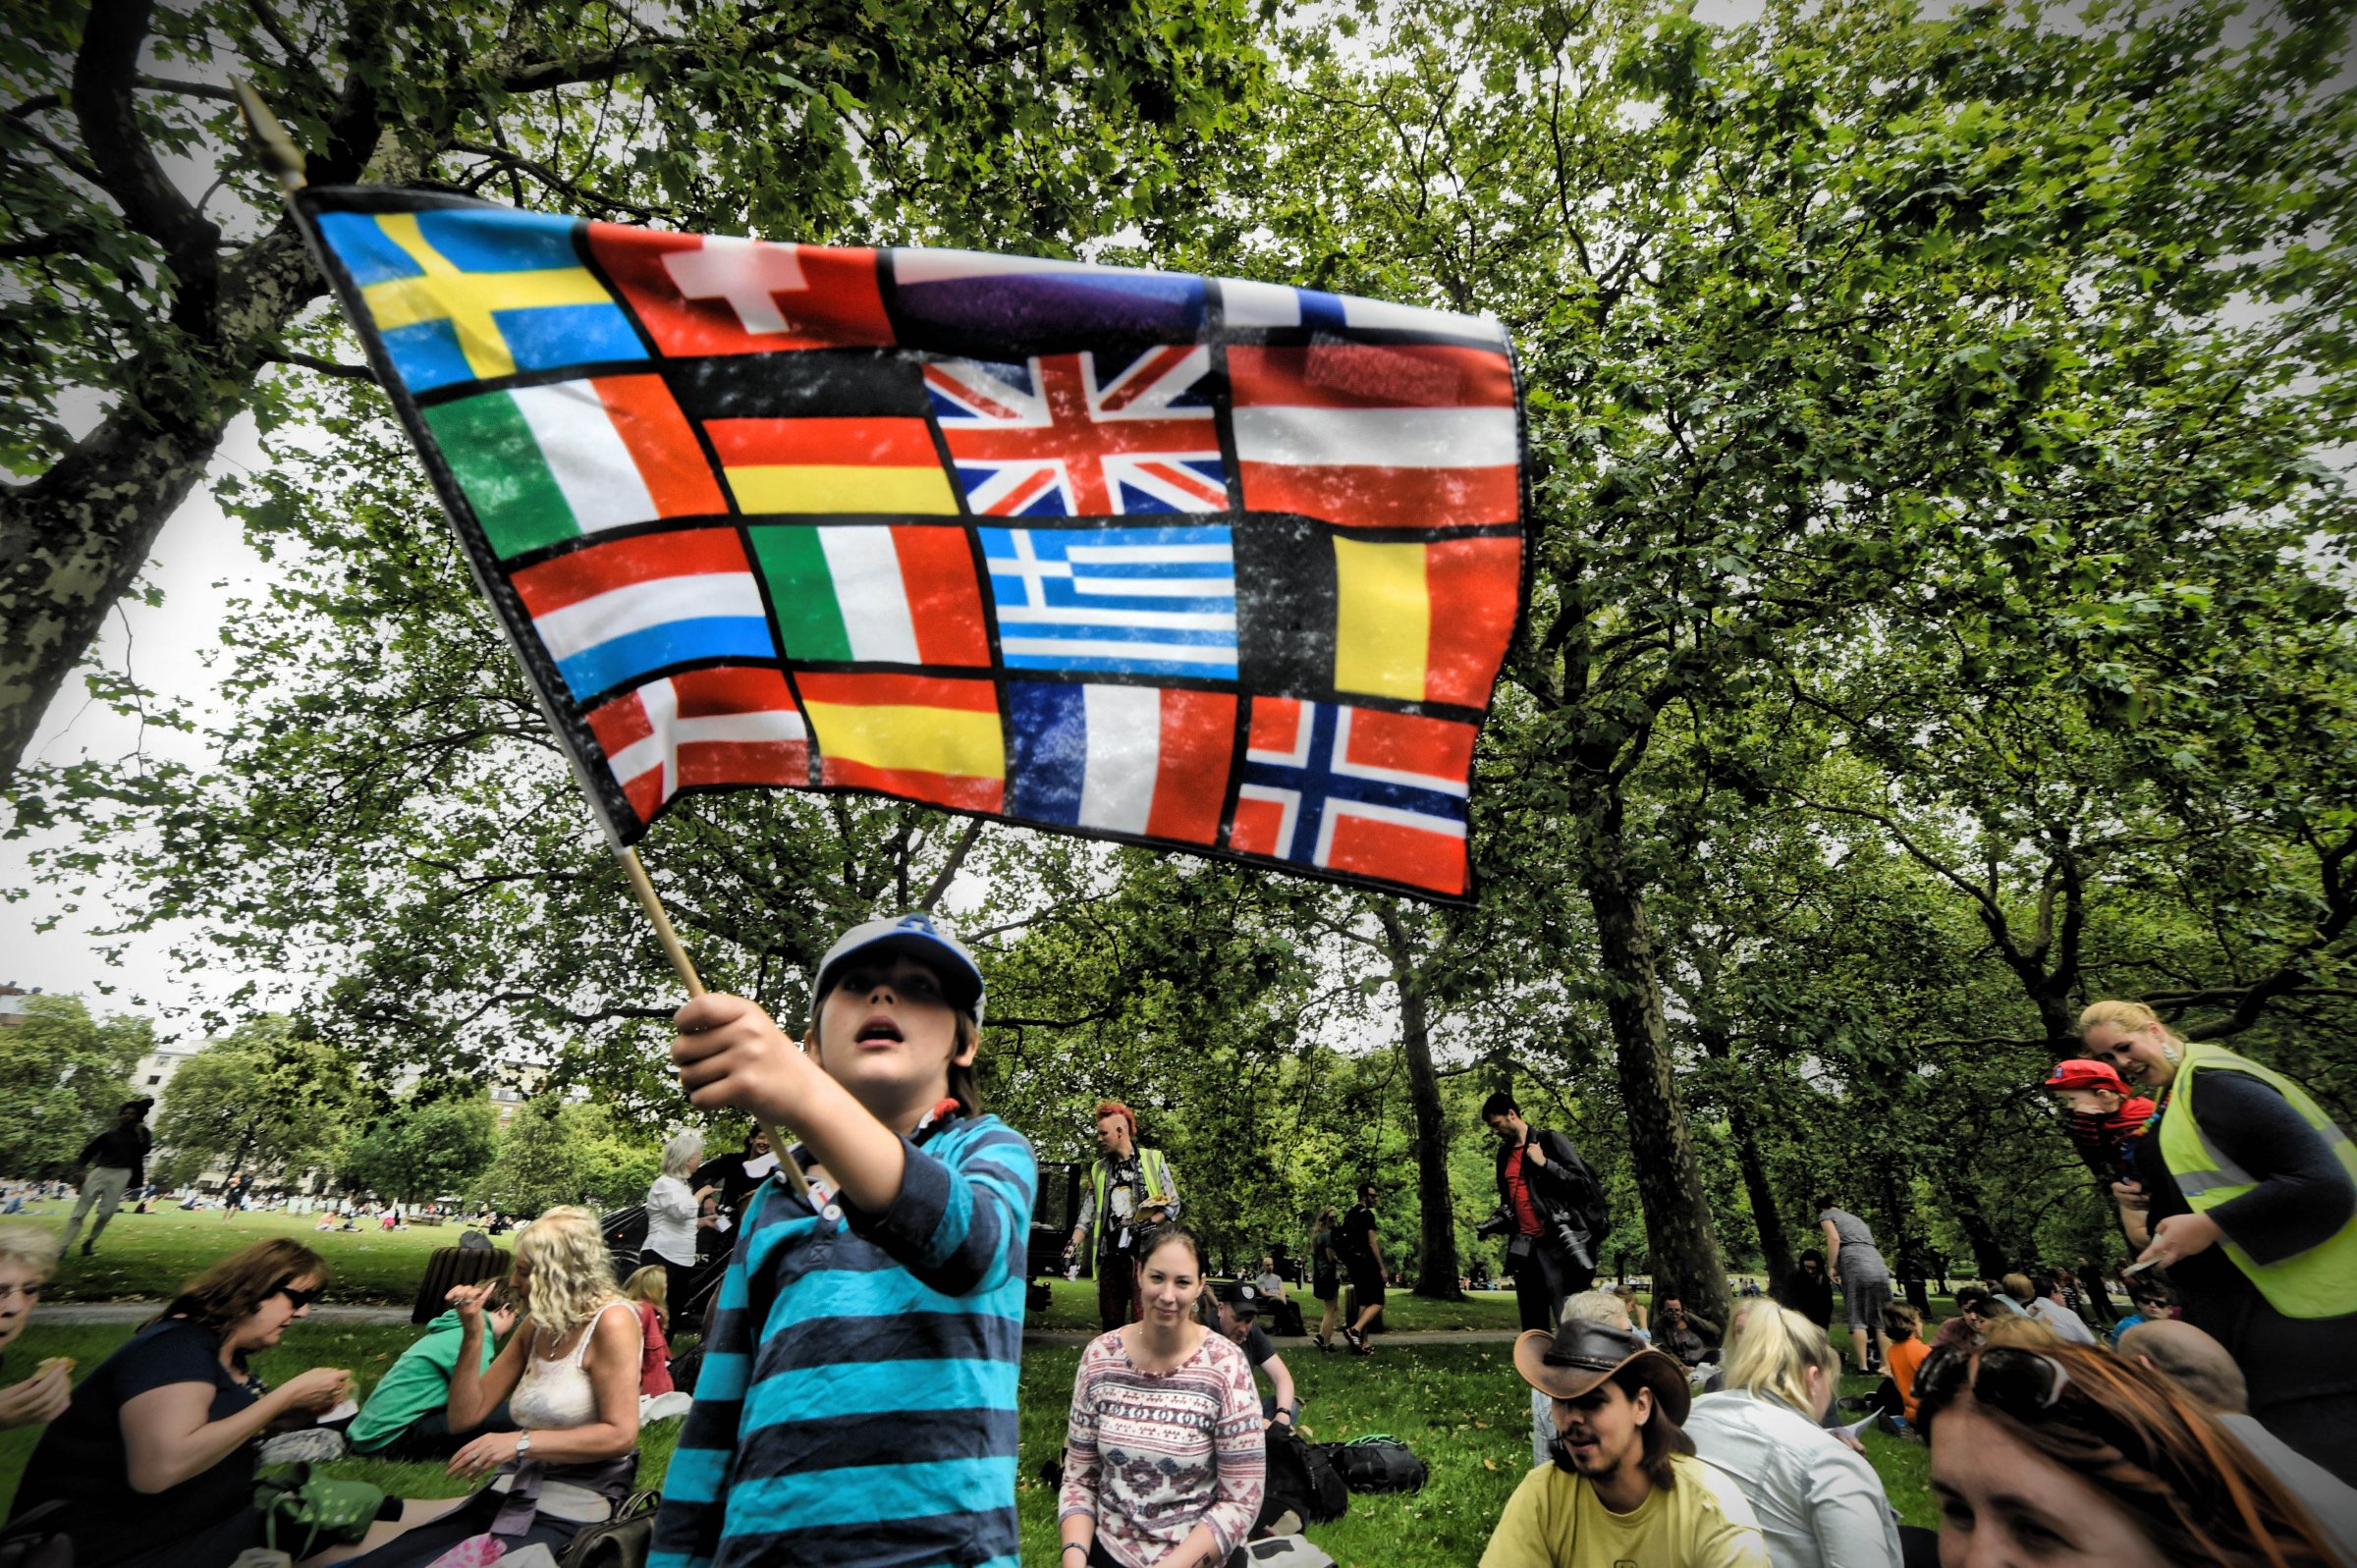 United Kingdom: Picnic against Brexit organised by the General Assembly in Green Park